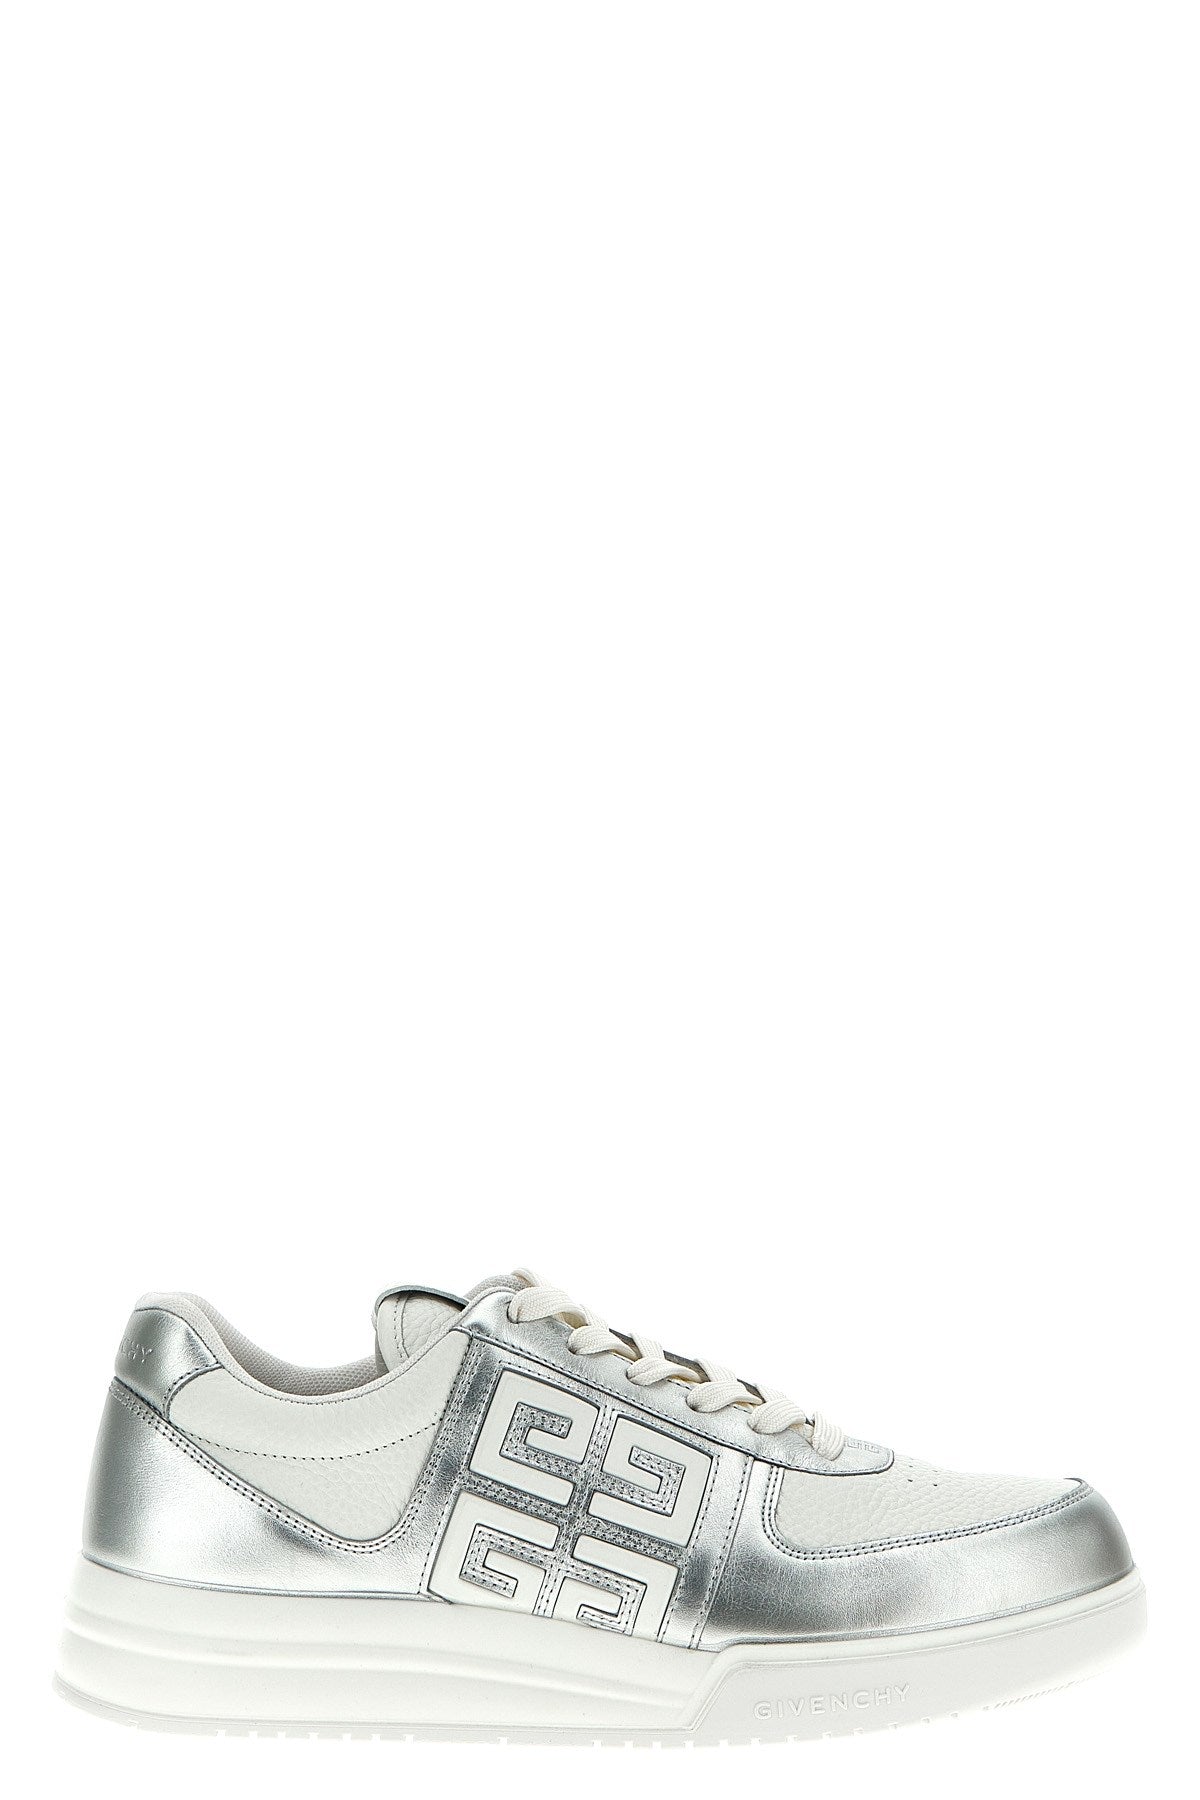 Givenchy Men '4g' Sneakers In White